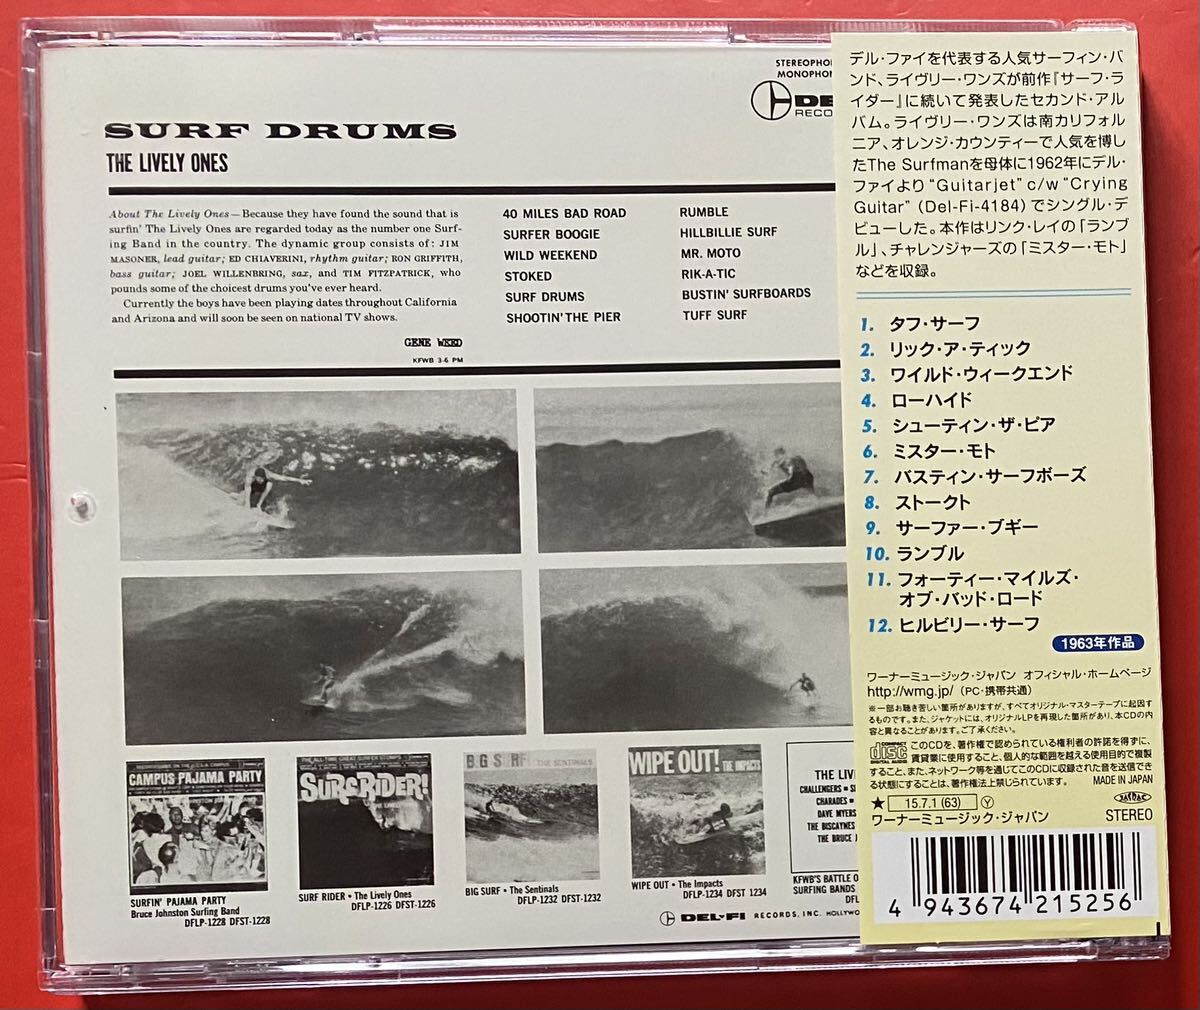 【CD】ライブリー・ワンズ「SURF DRUMS」Lively Ones 国内盤 盤面良好 [02050375]の画像2